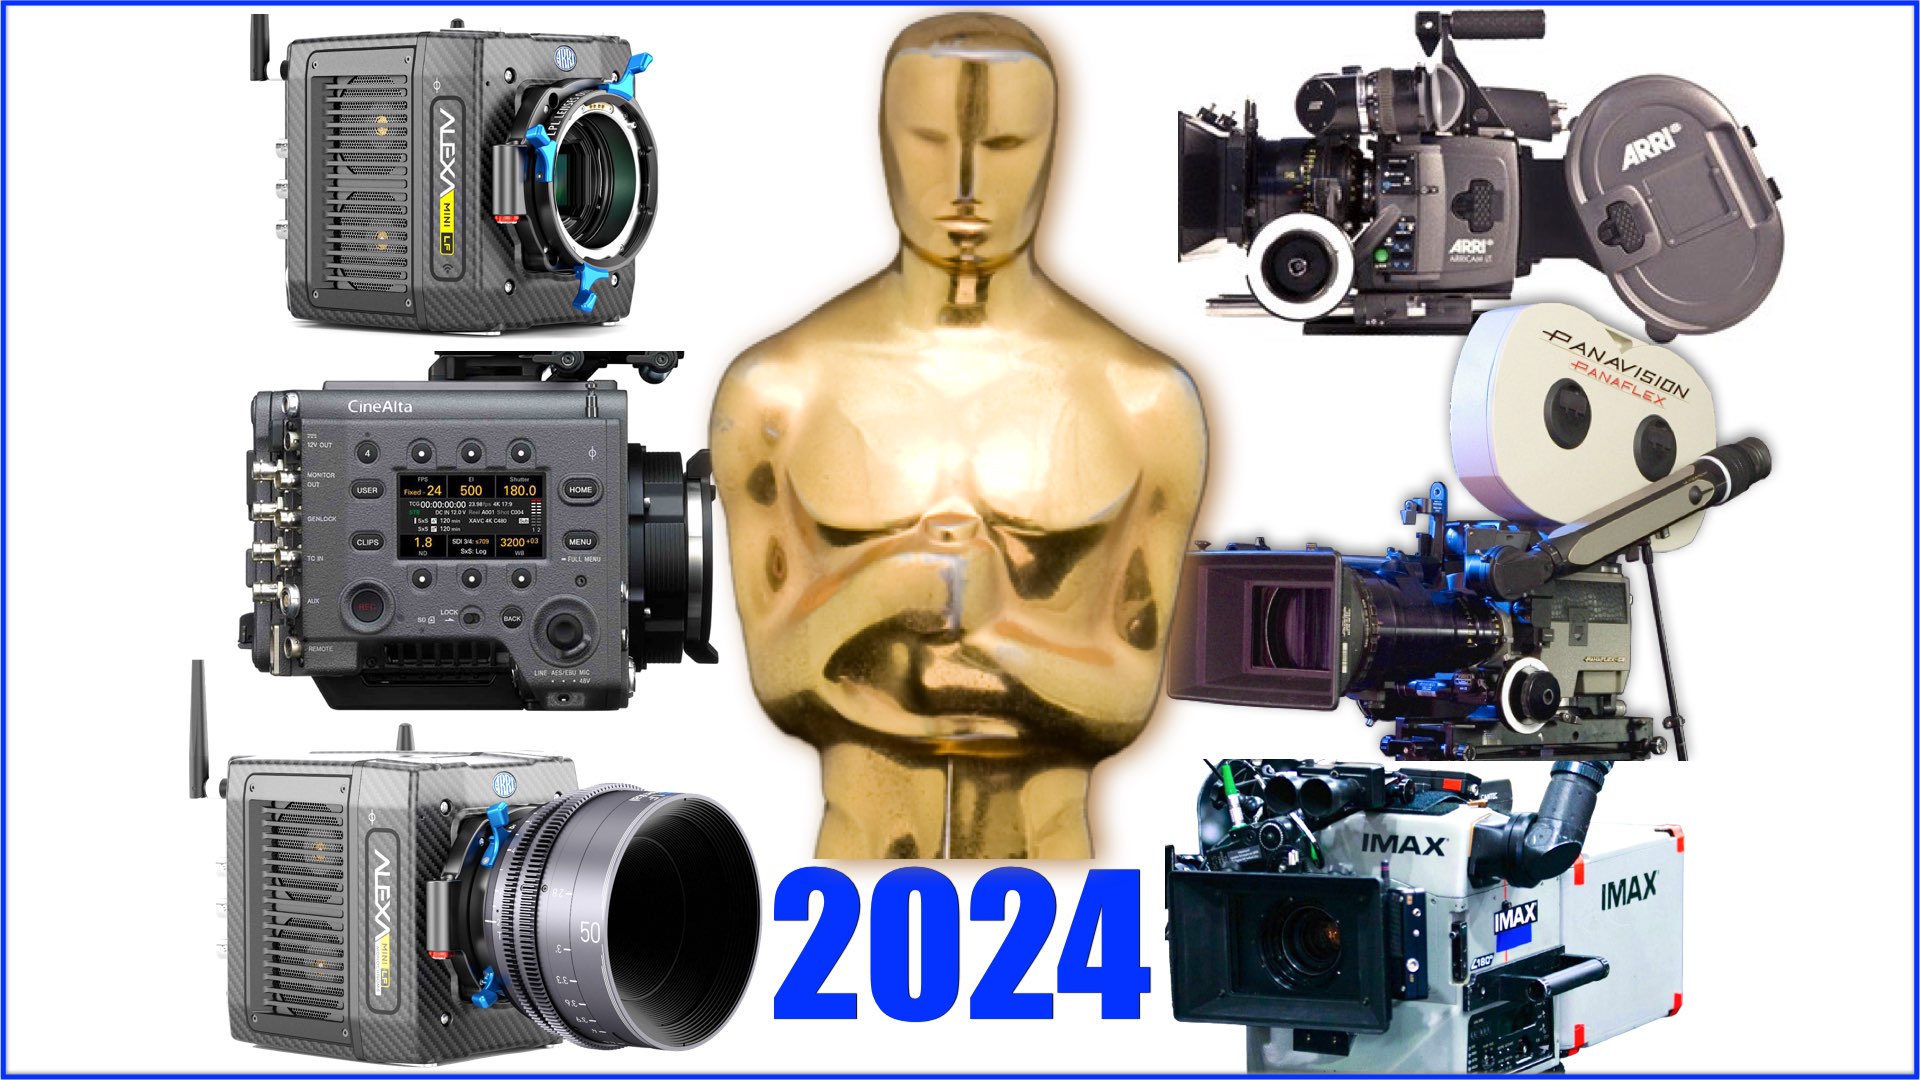 96th Academy Awards: The Cameras and Lenses